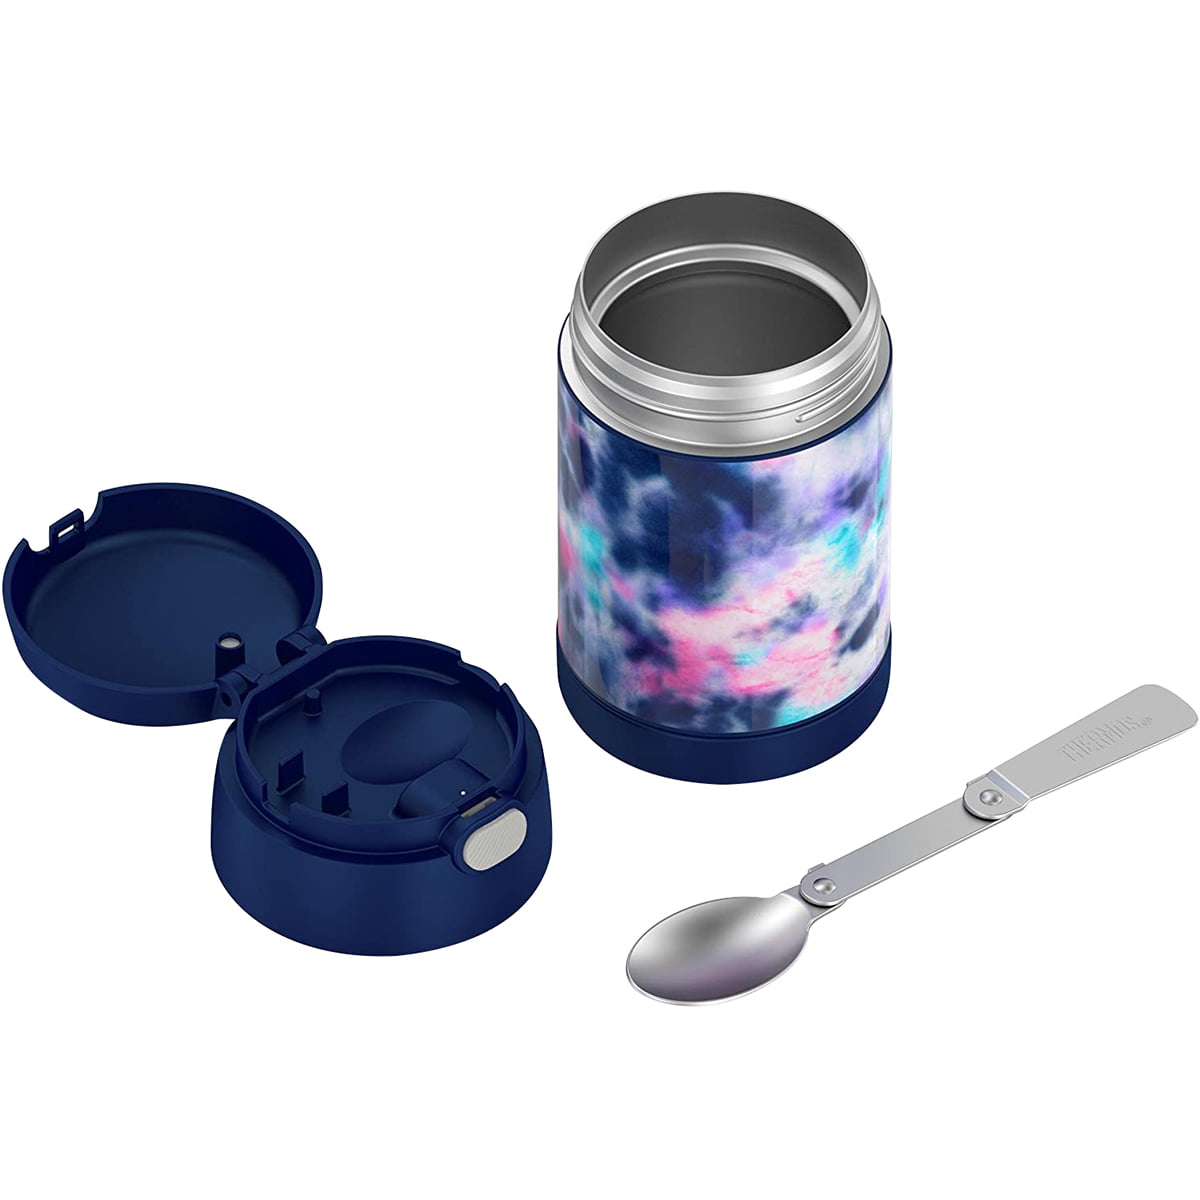 Thermos 16 Oz. Kid's Funtainer Stainless Steel Insulated Food Jar - Tie Dye  : Target